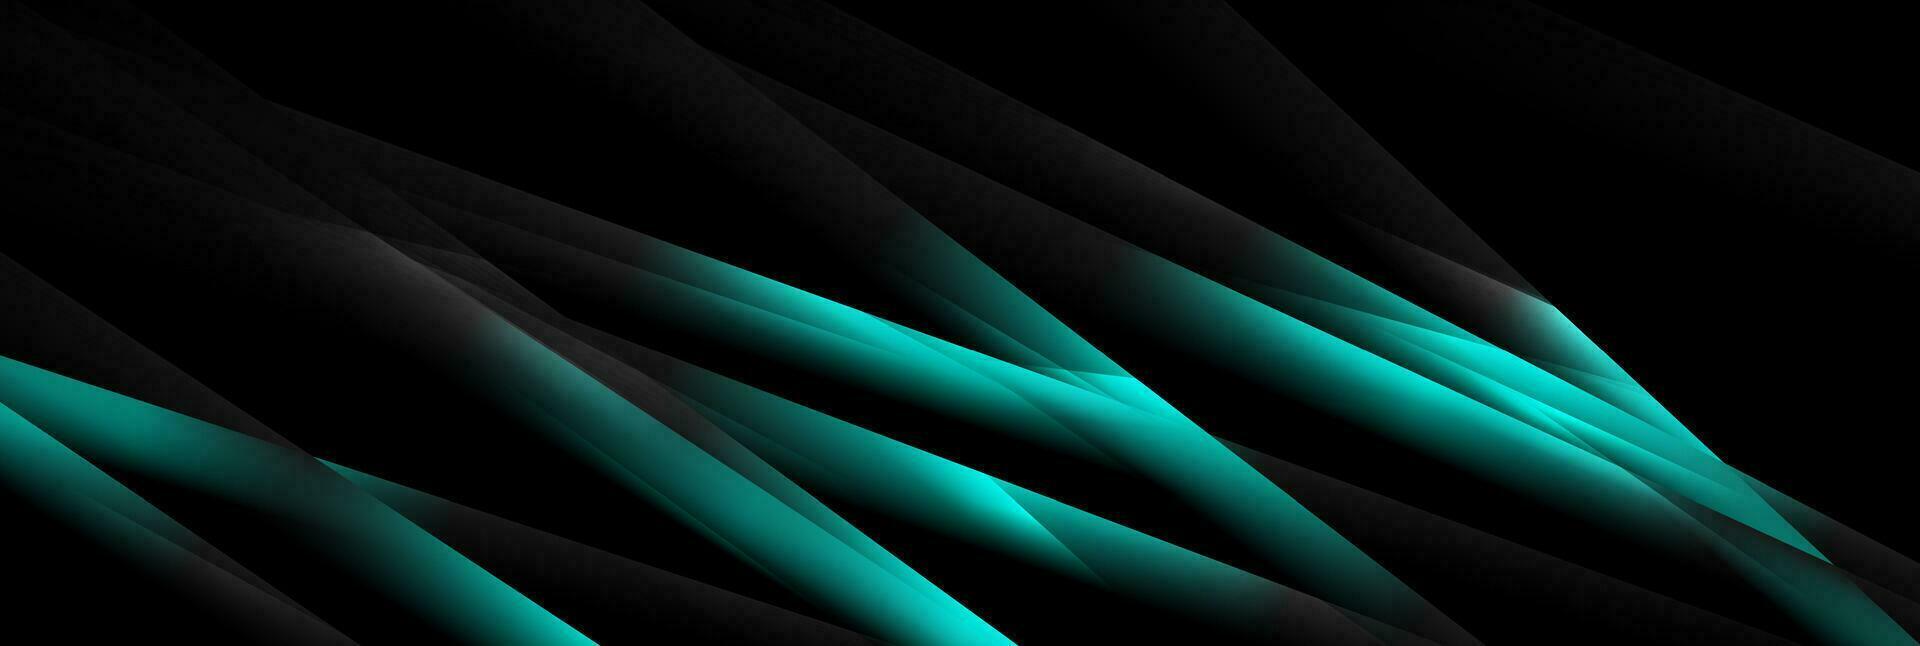 Bright blue cyan abstract glossy stripes on black background vector